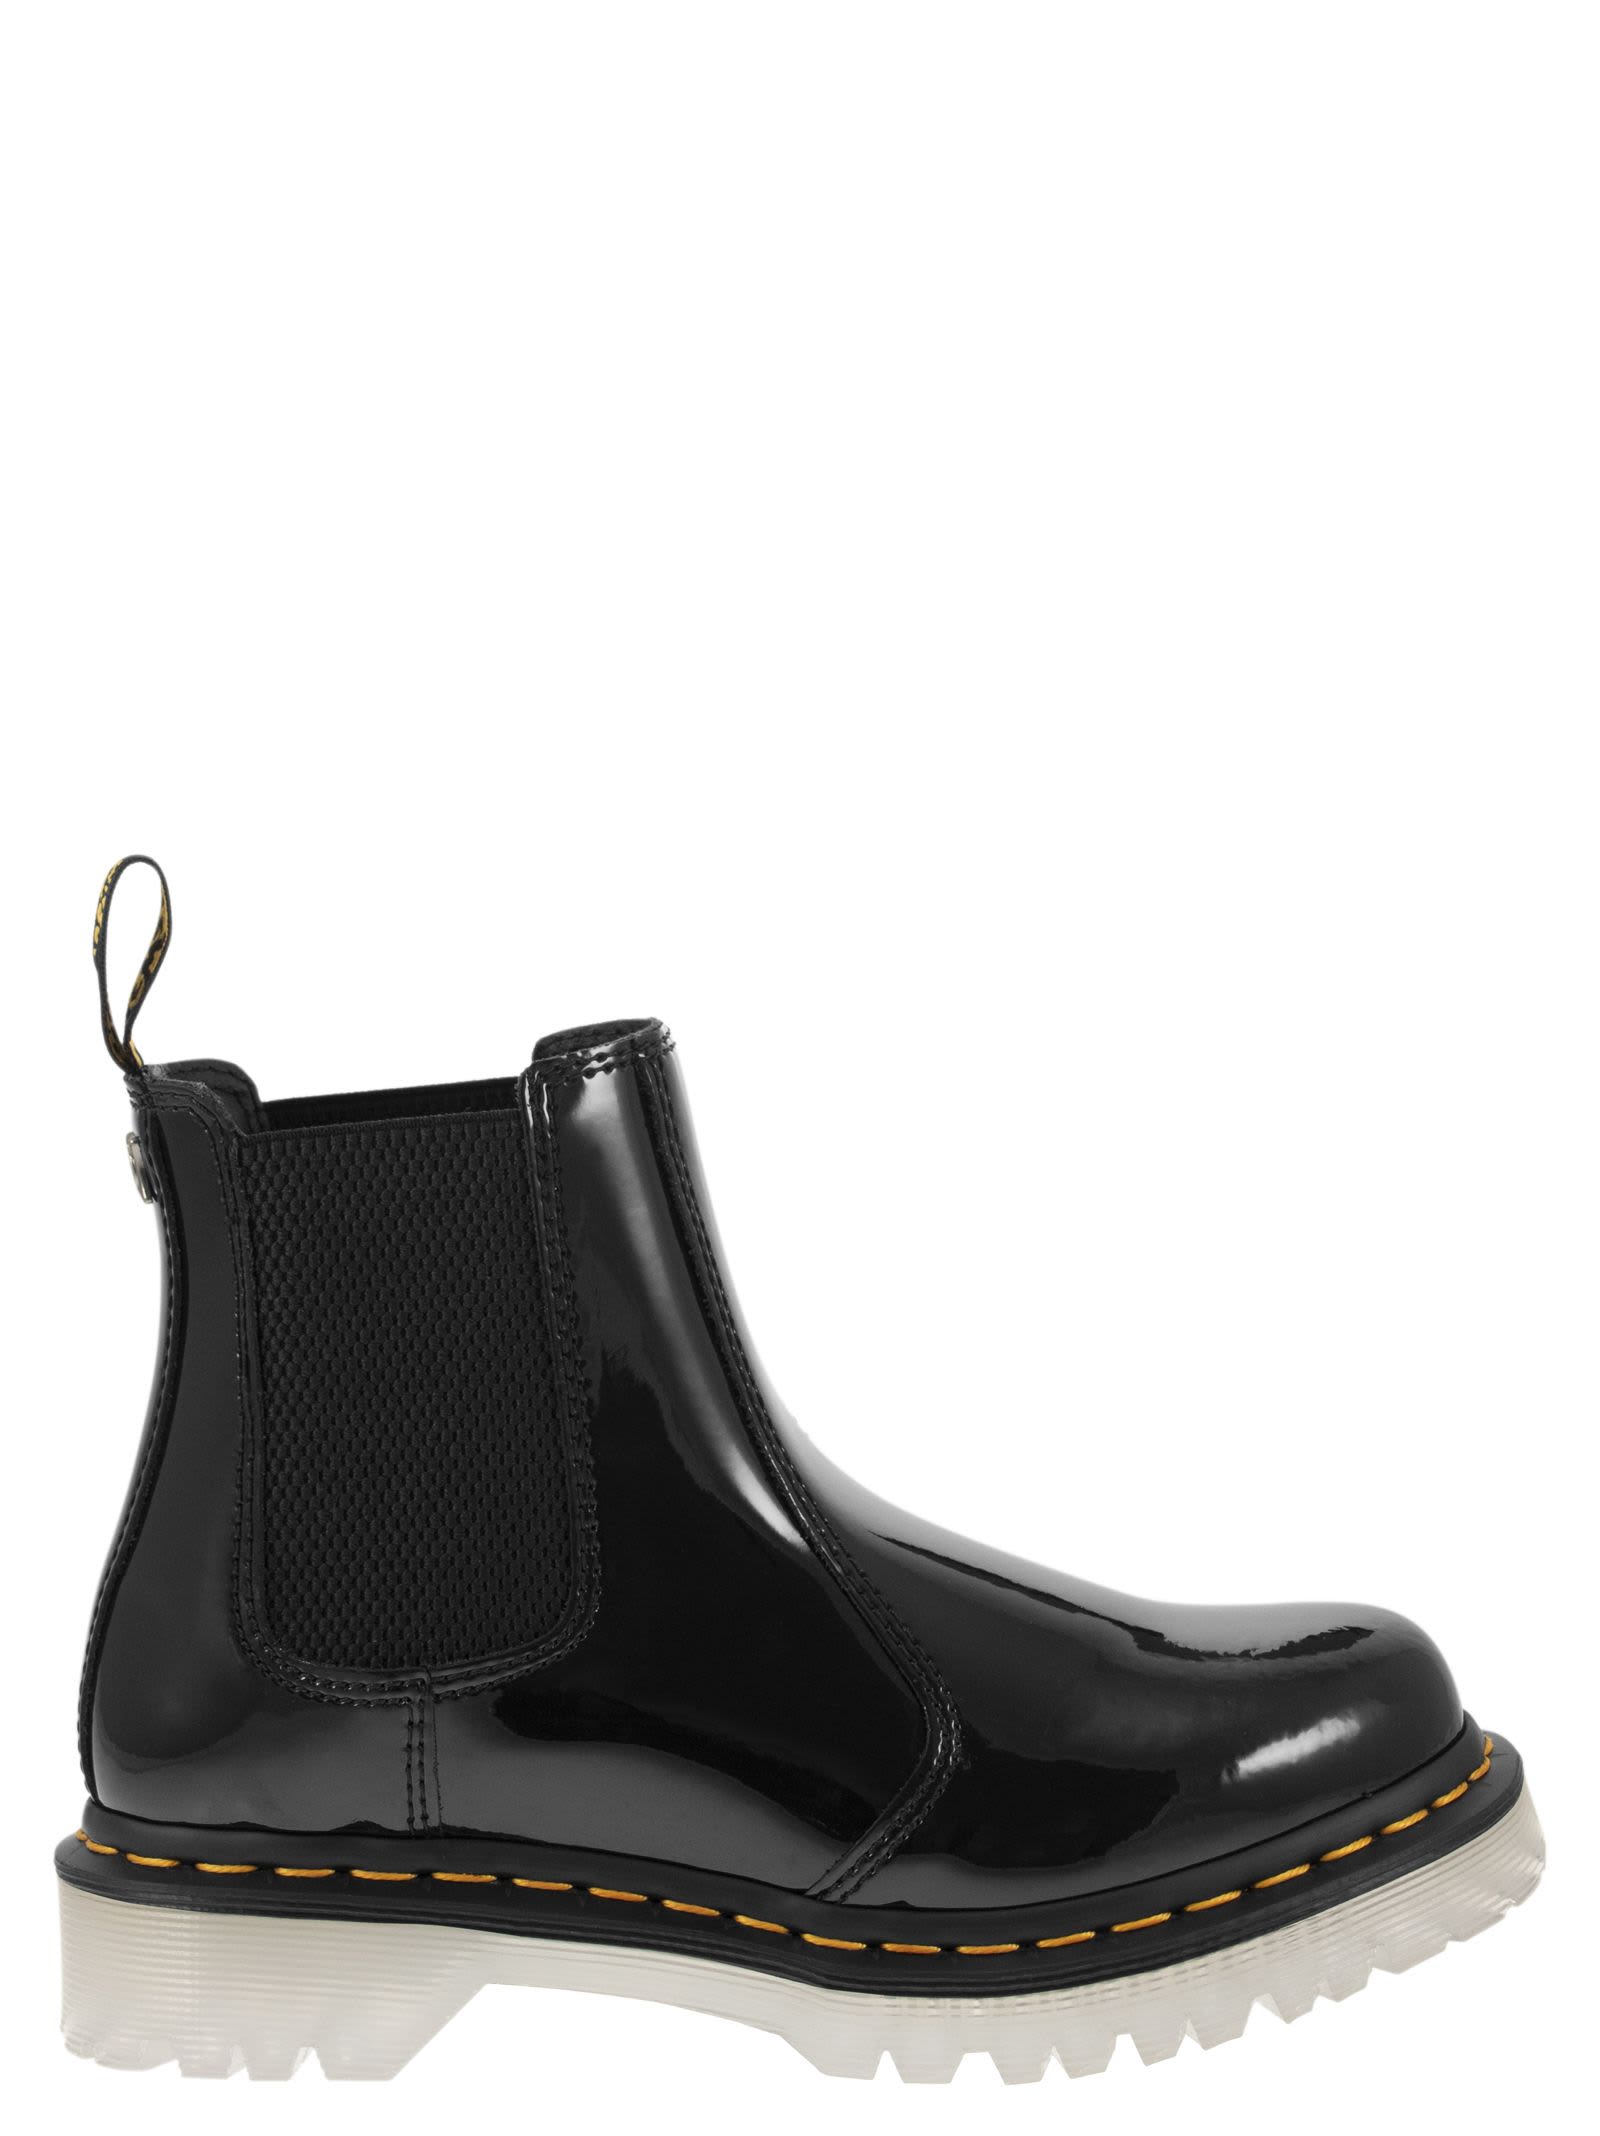 Dr. Martens 2976 Iced Ben - Ankle Boot